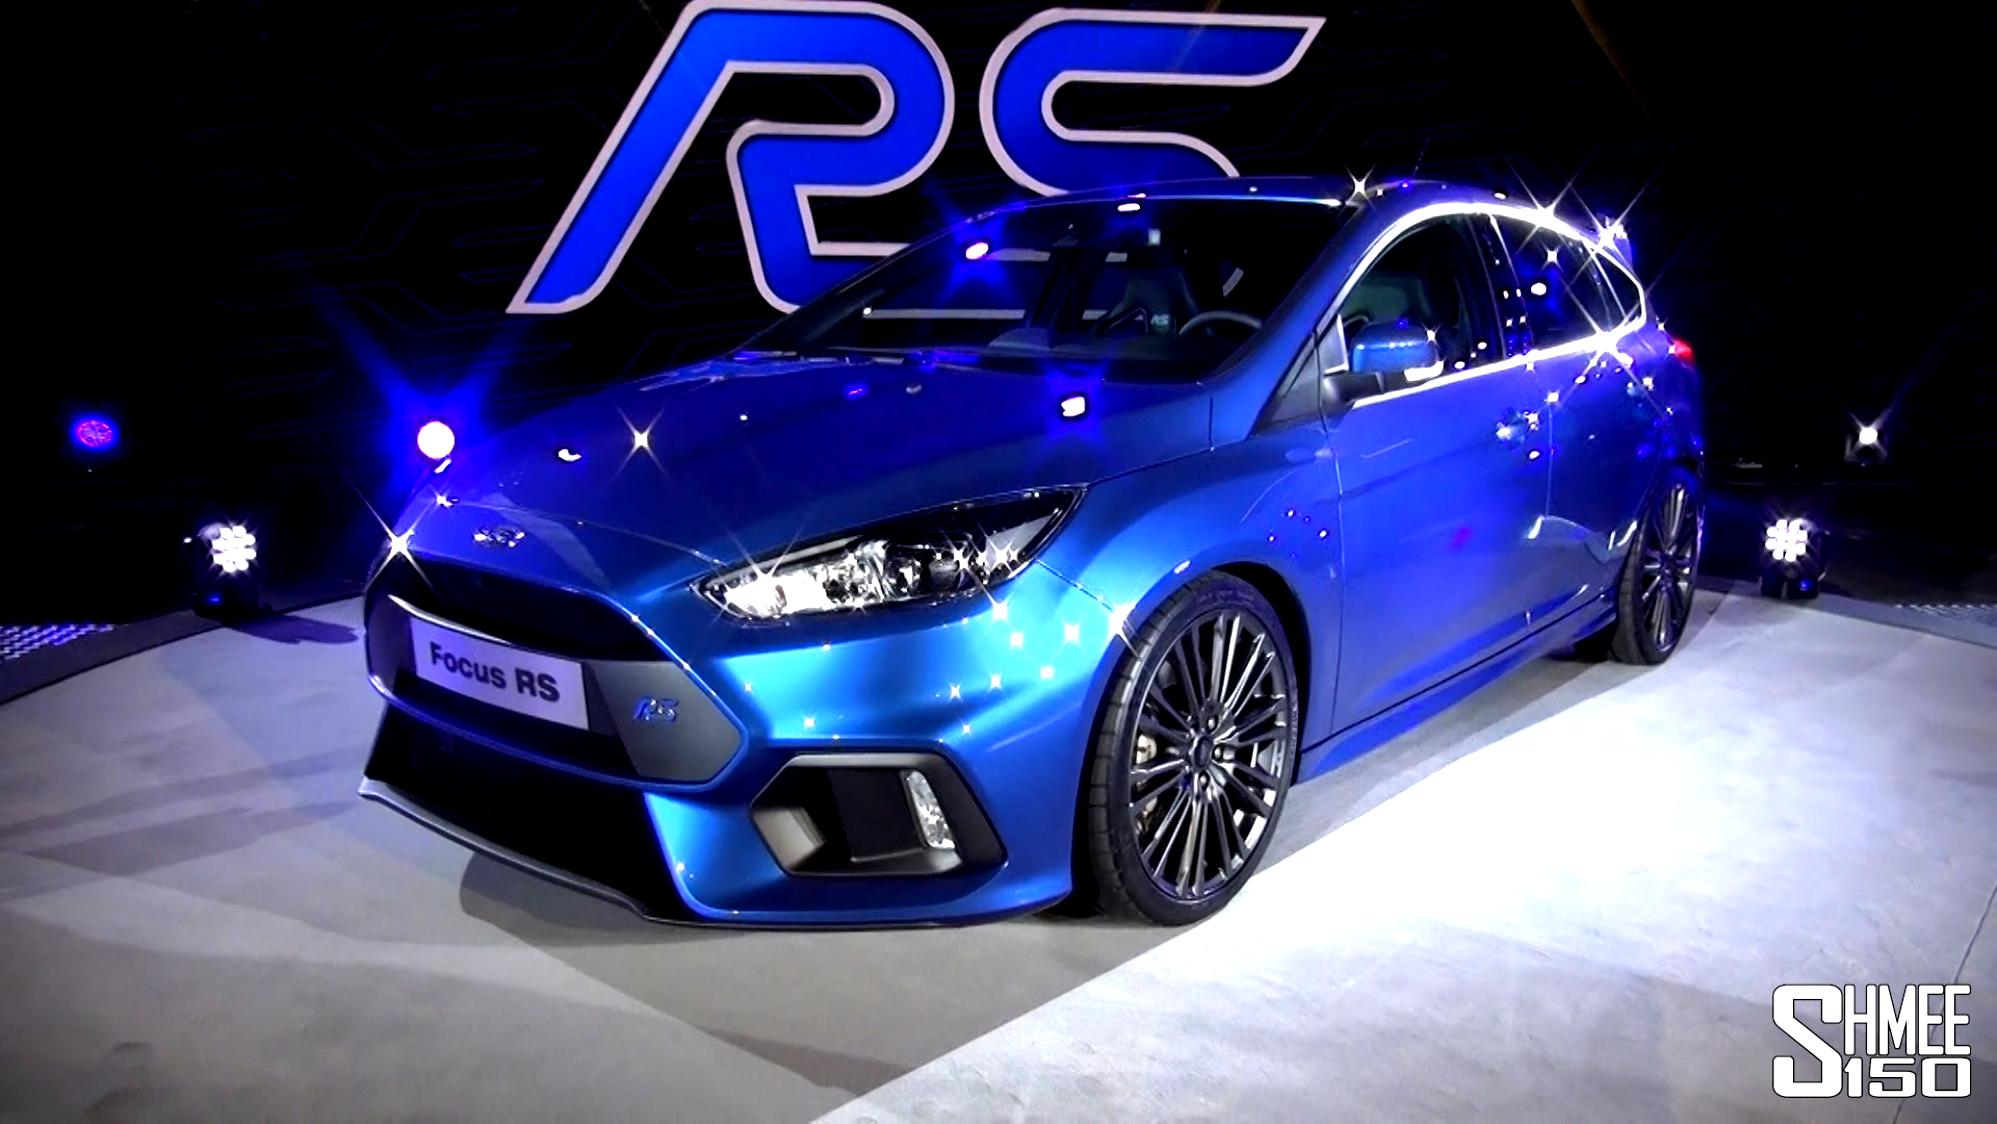 Ford Focus RS 2016 #45